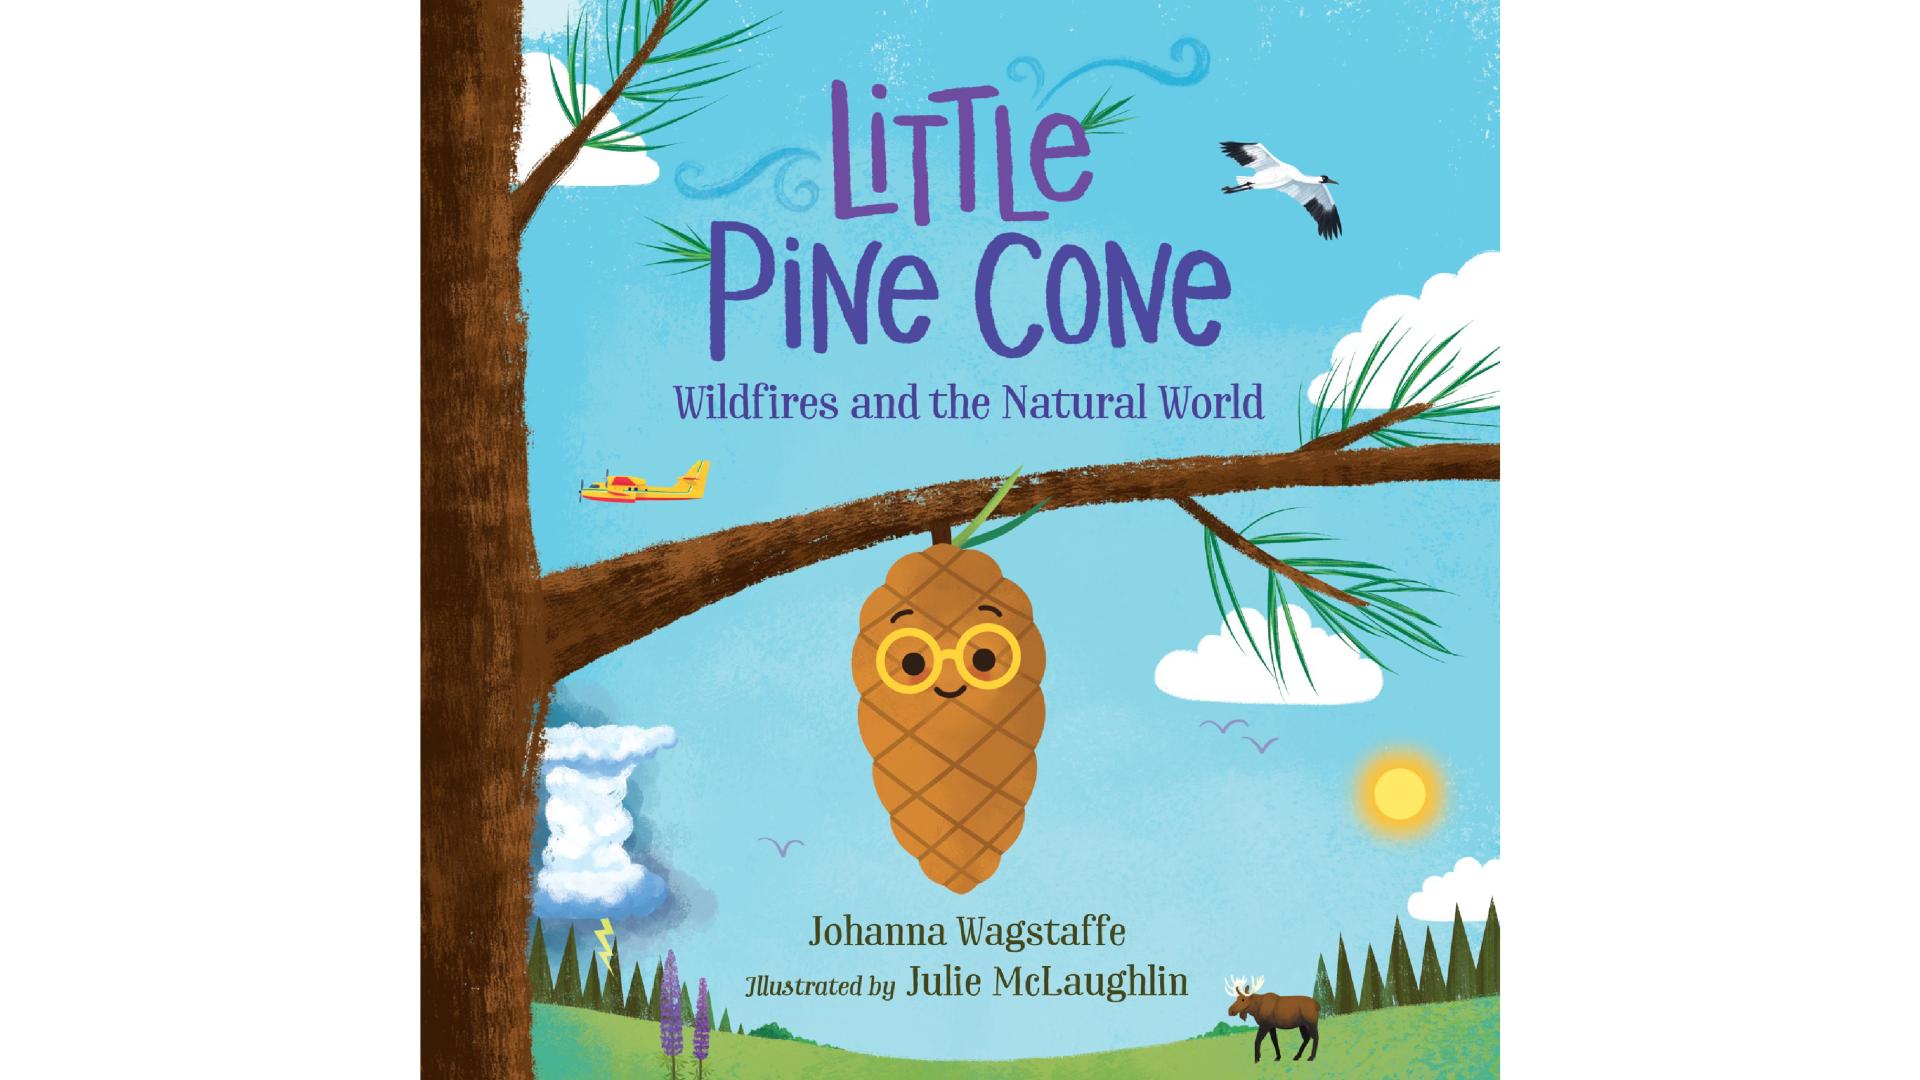 An image of the front cover of the book "Little Pine Cone"